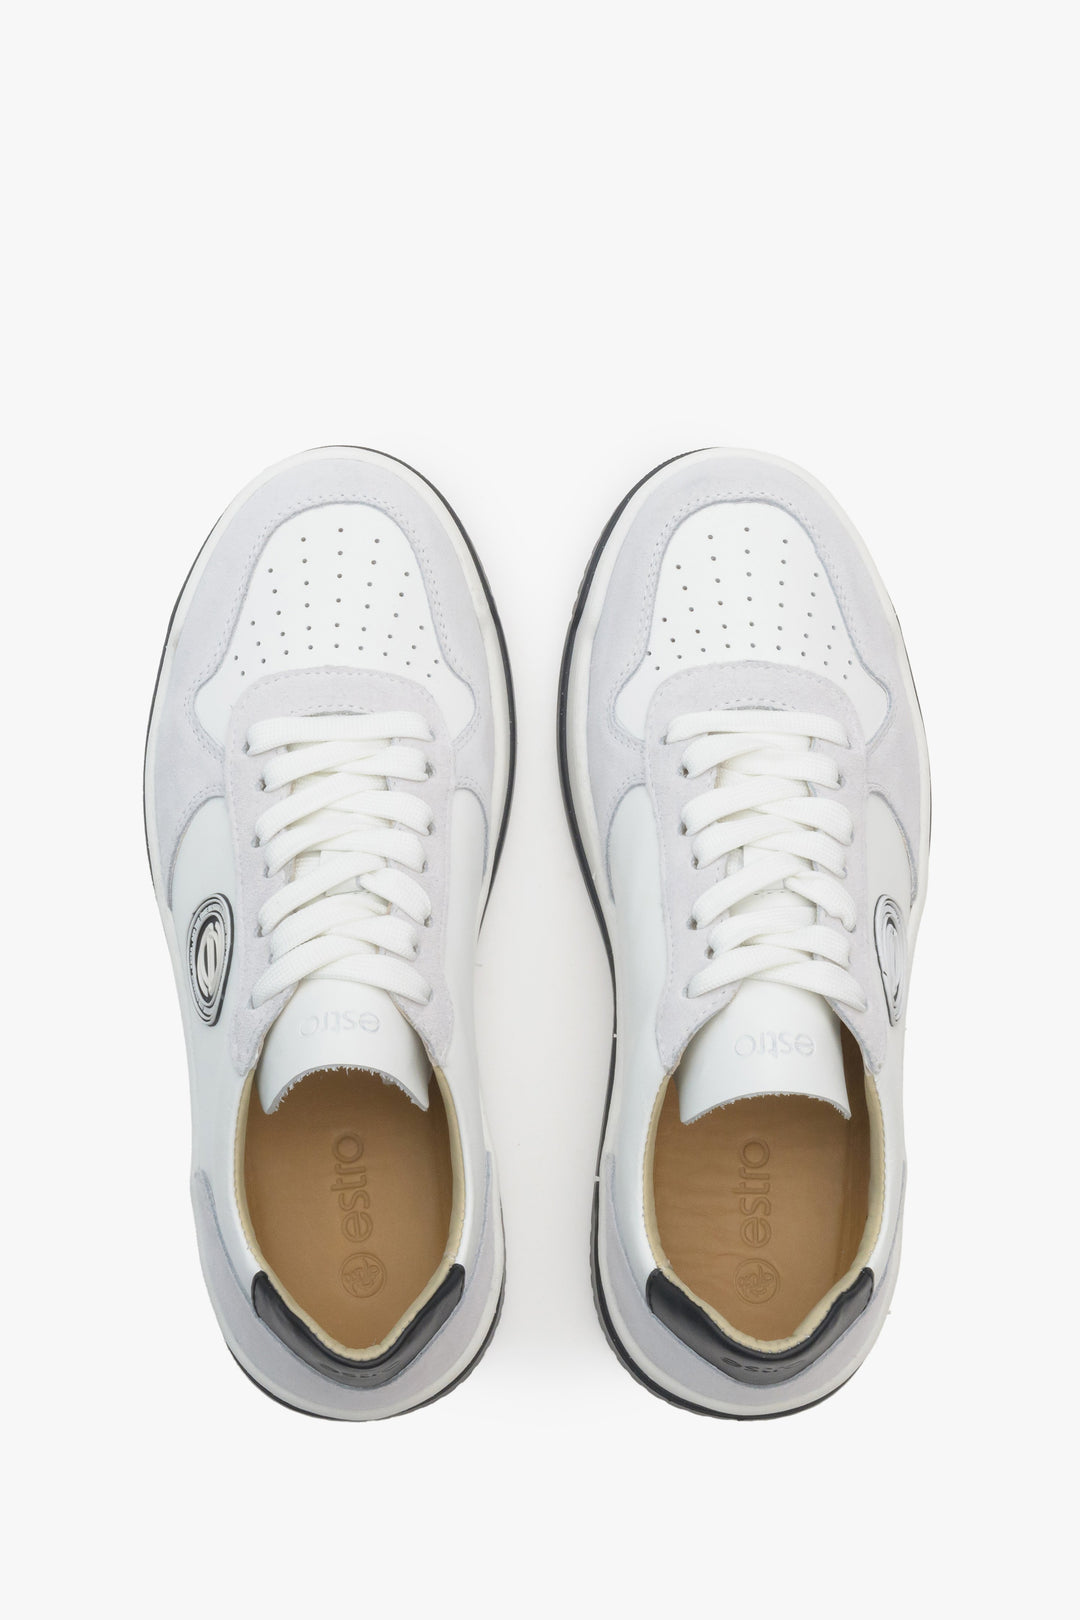 Women's leather sneakers by Estro in grey and white color - top view presentation.